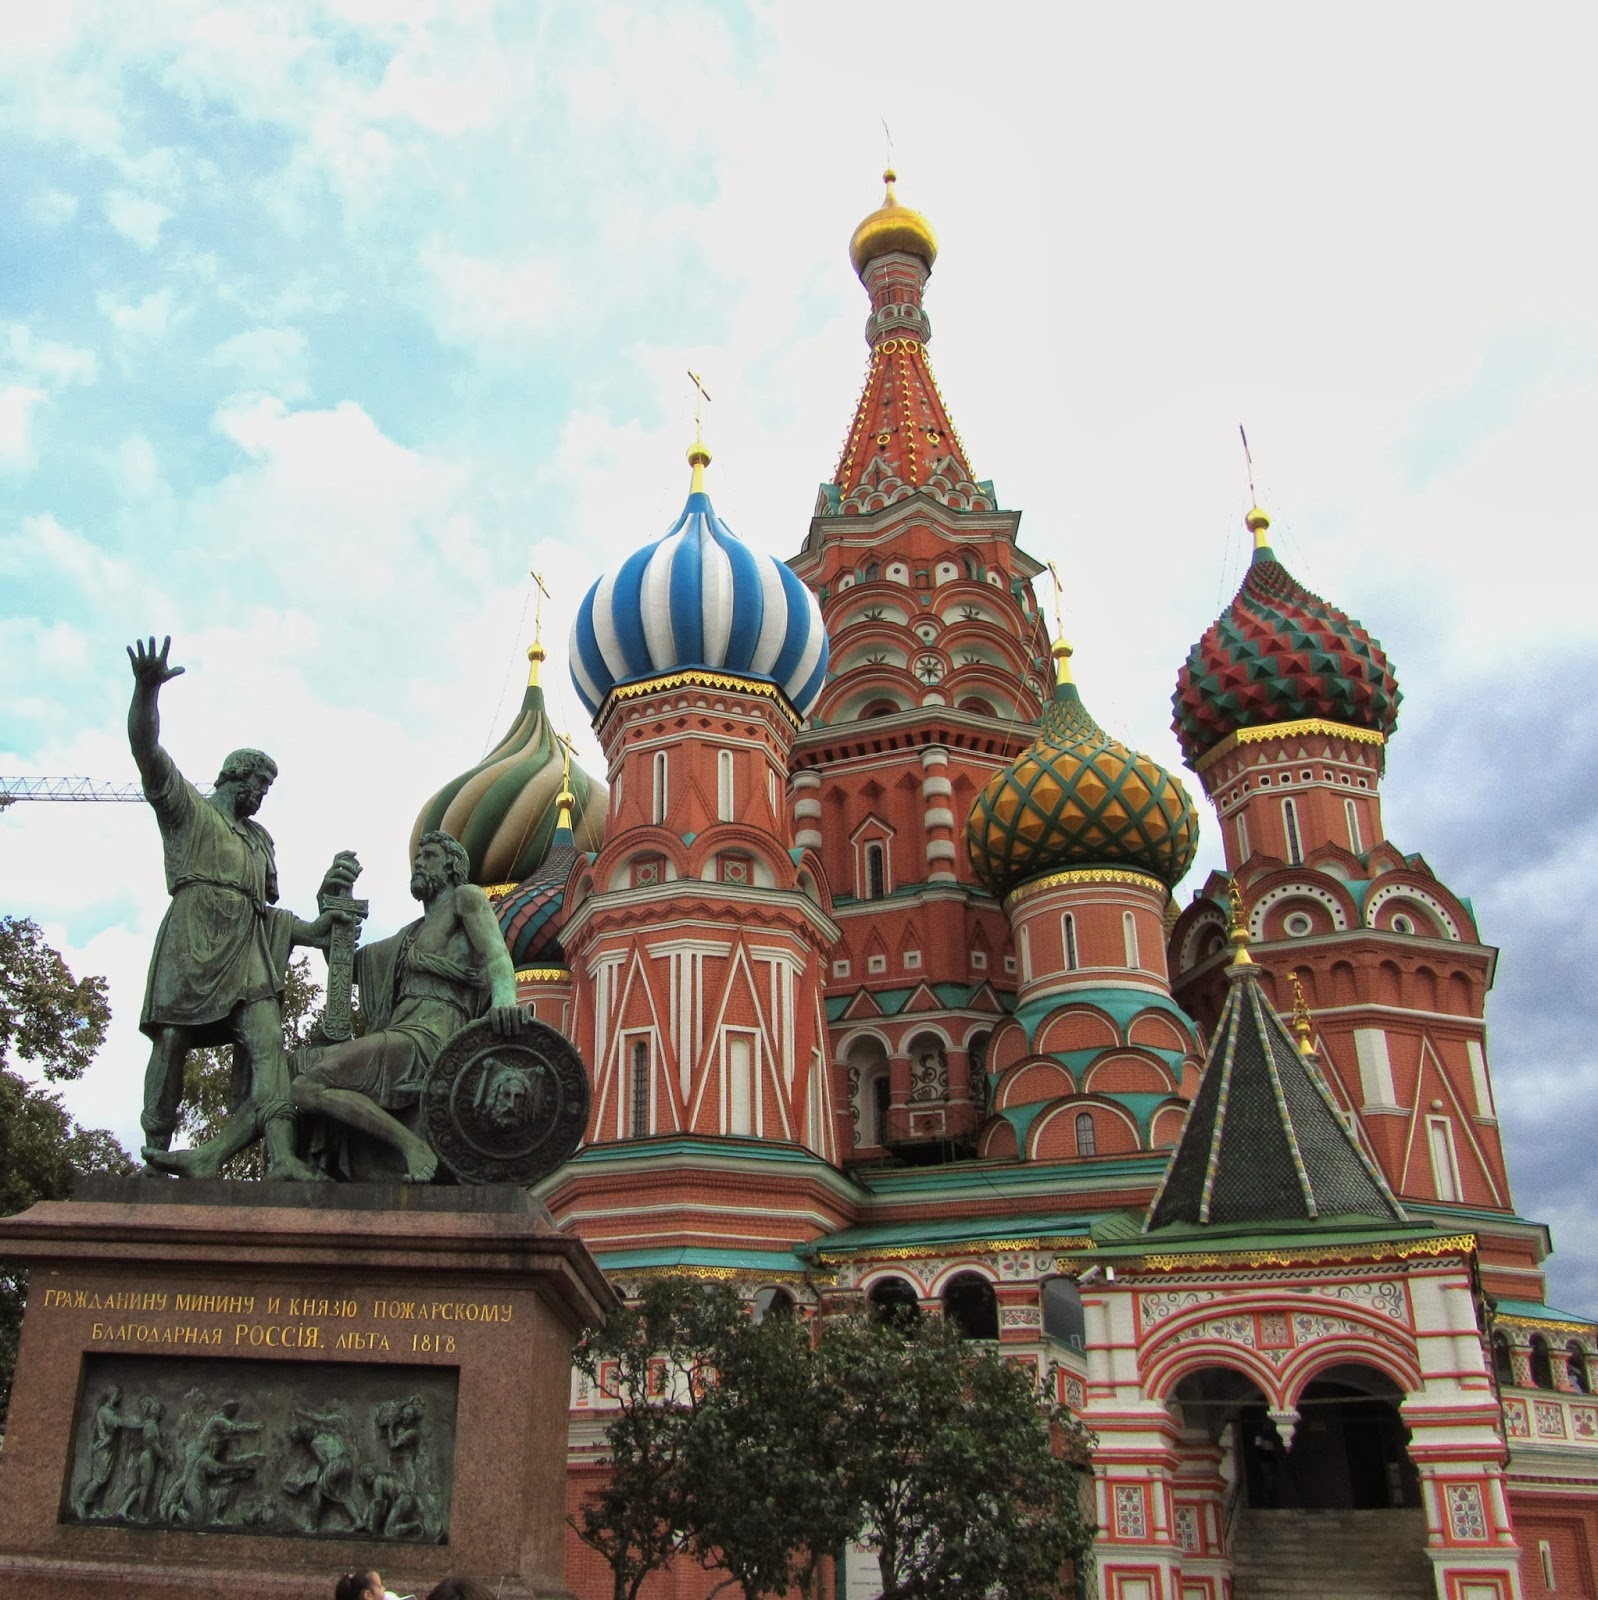 Pritam Rohila Travels: 2012, SEPTEMBER 7: RUSSIA, MOSCOW - RED SQUARE